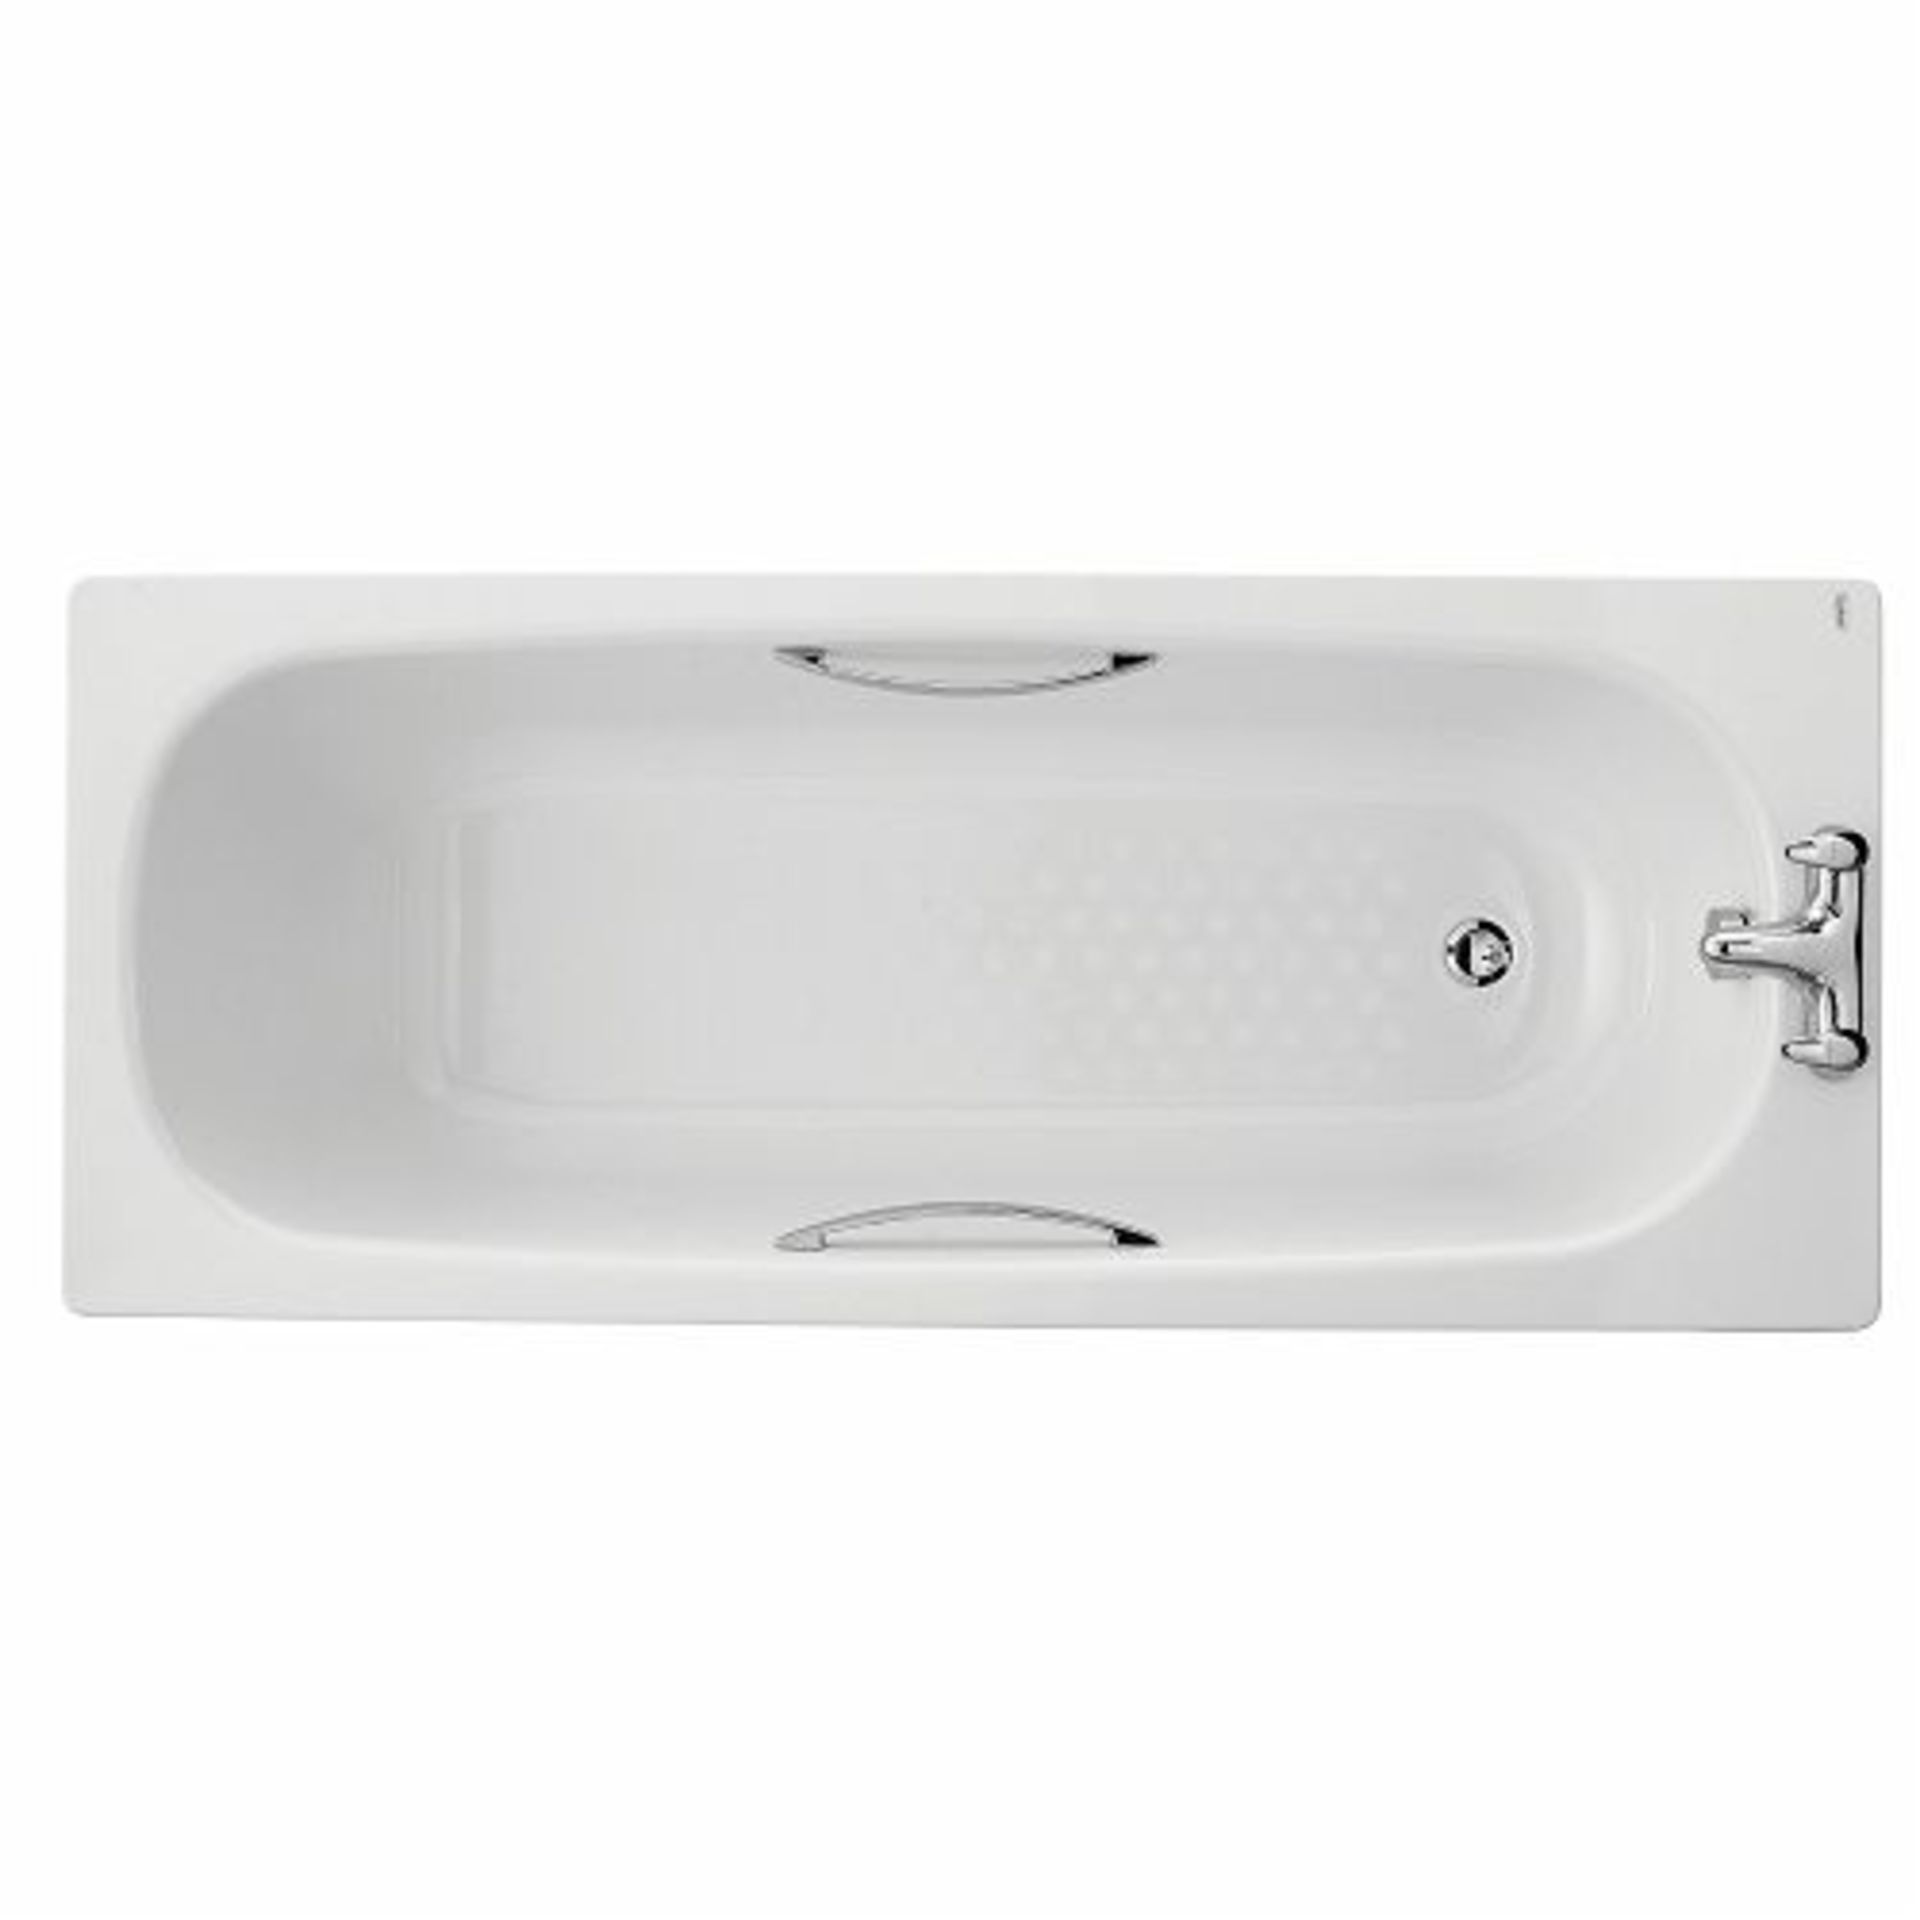 (RC51) 1700mm Twyford Single Ended Bathtub. RRP £429.99. Not tap hole, Slip resist. The white ... - Image 2 of 2